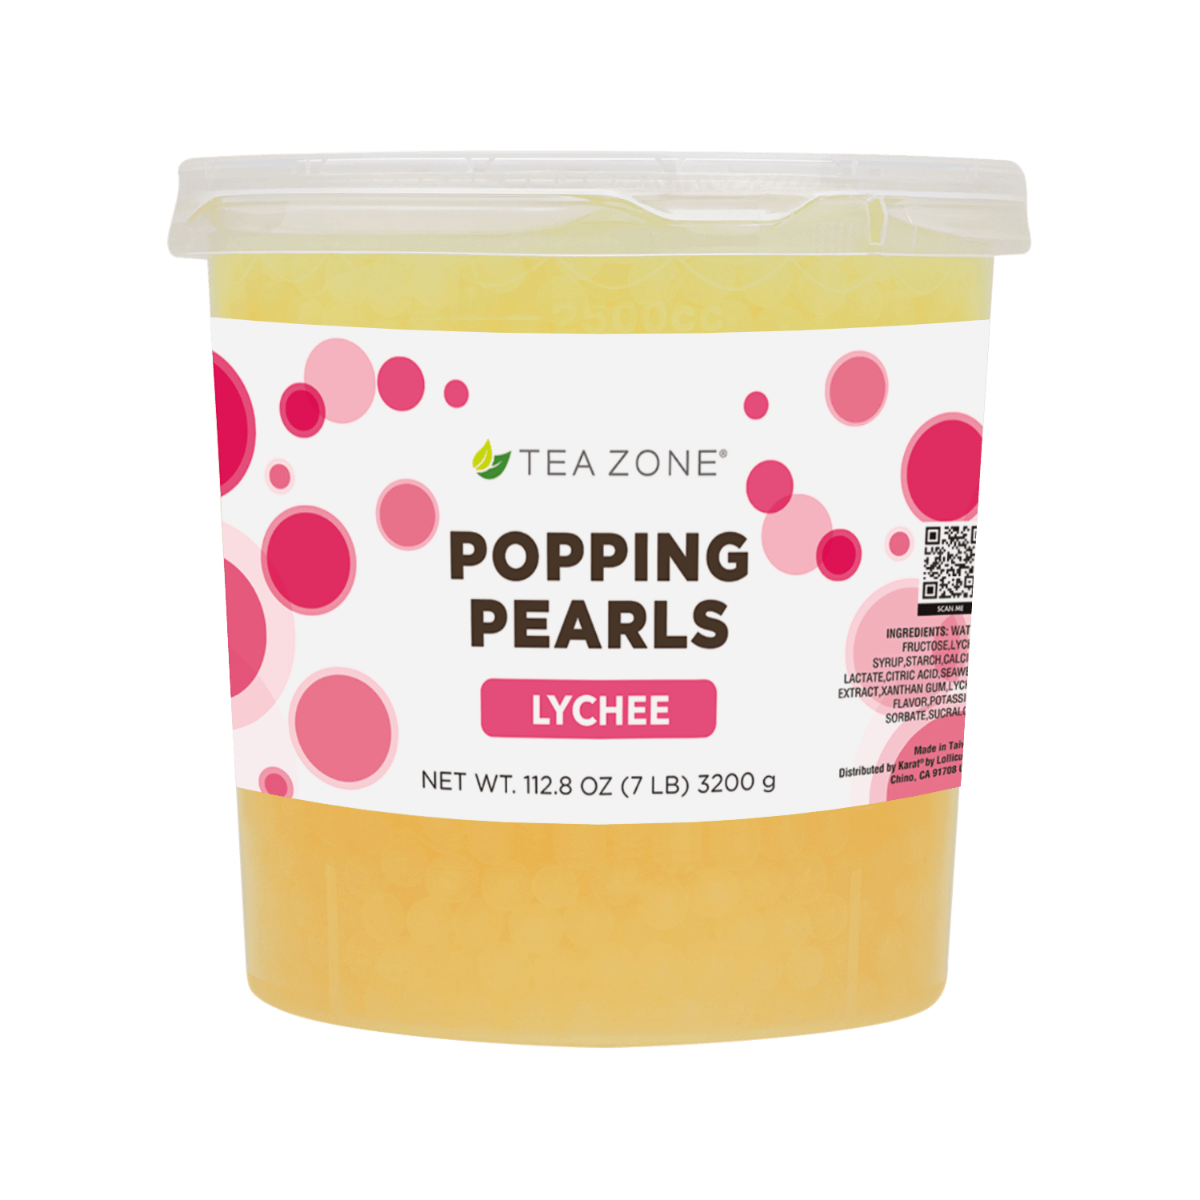 Tea Zone Lychee Popping Pearls (7 lbs) case of 4